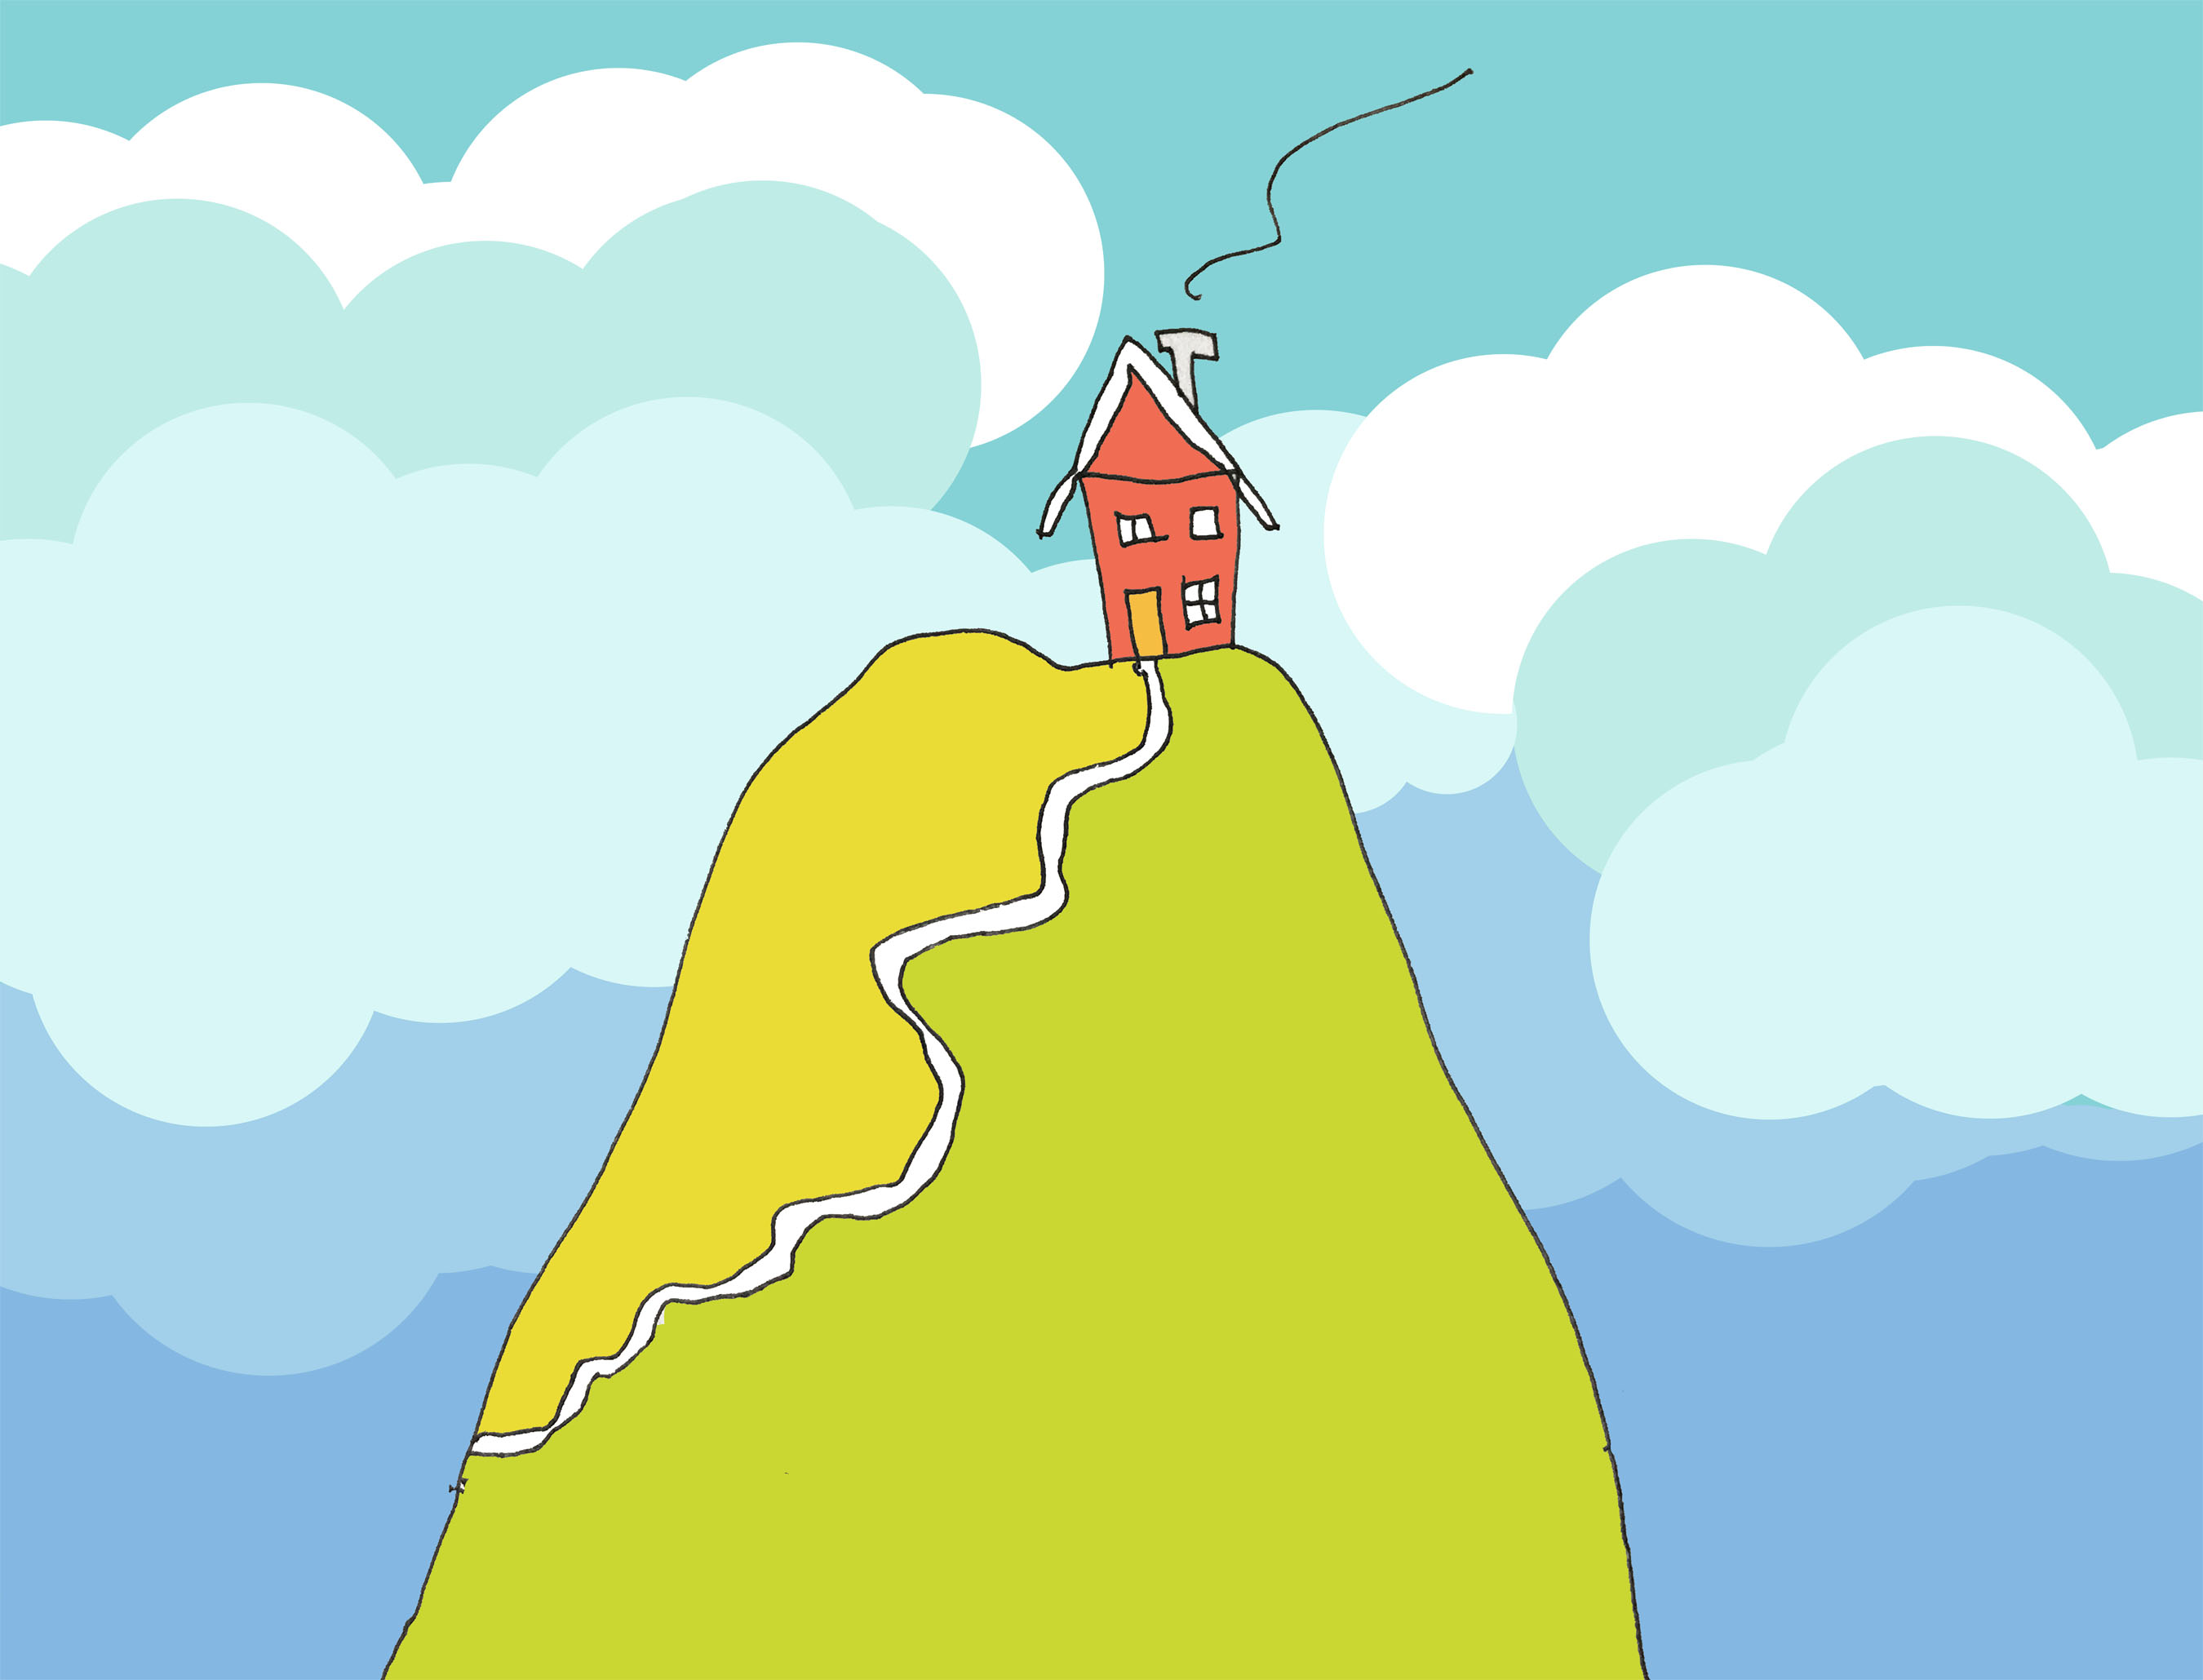 art every day number 463 / illustration / house on a hill